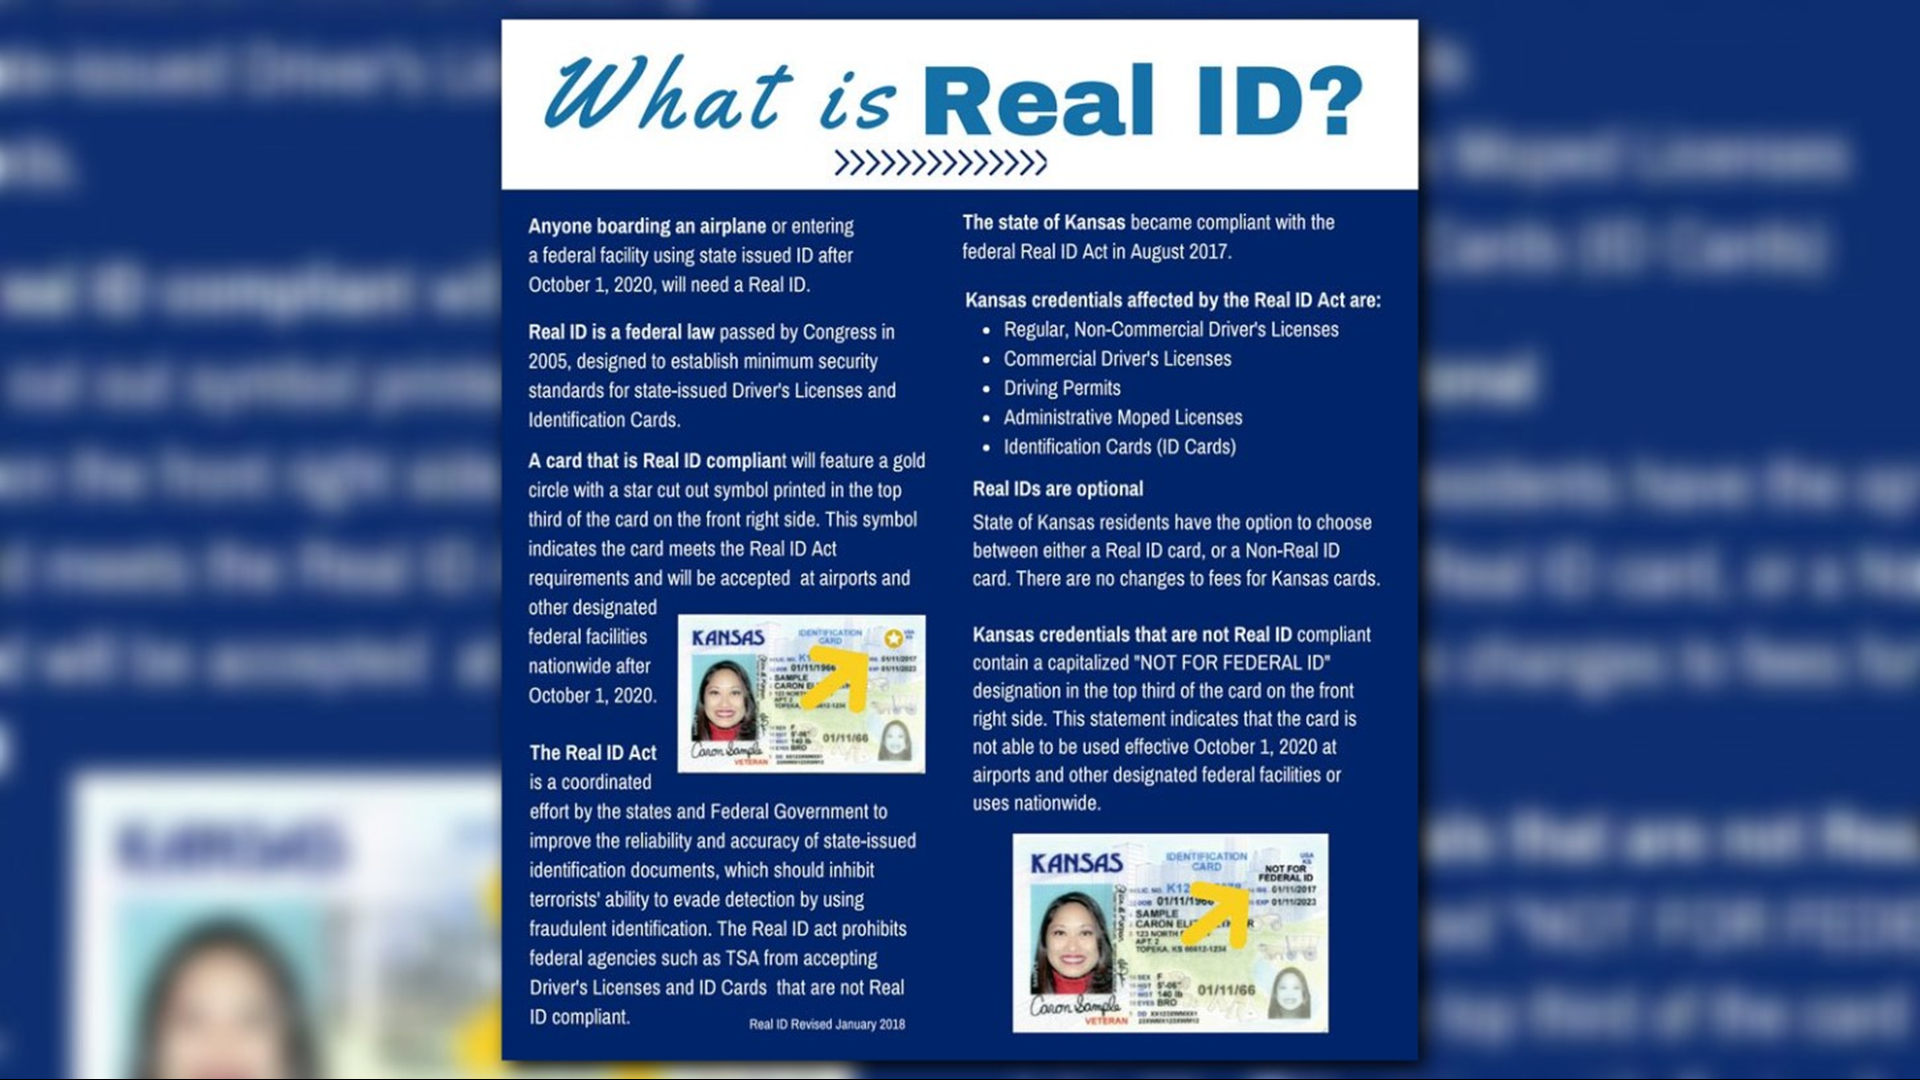 You've probably seen this topic come scrolling by your social media feeds. In two weeks you will only be able to fly with a passport. No driver’s license. No REAL ID. It freaked us out, too, so we thought we could clear up what's really going on. It's time to connect the dots.